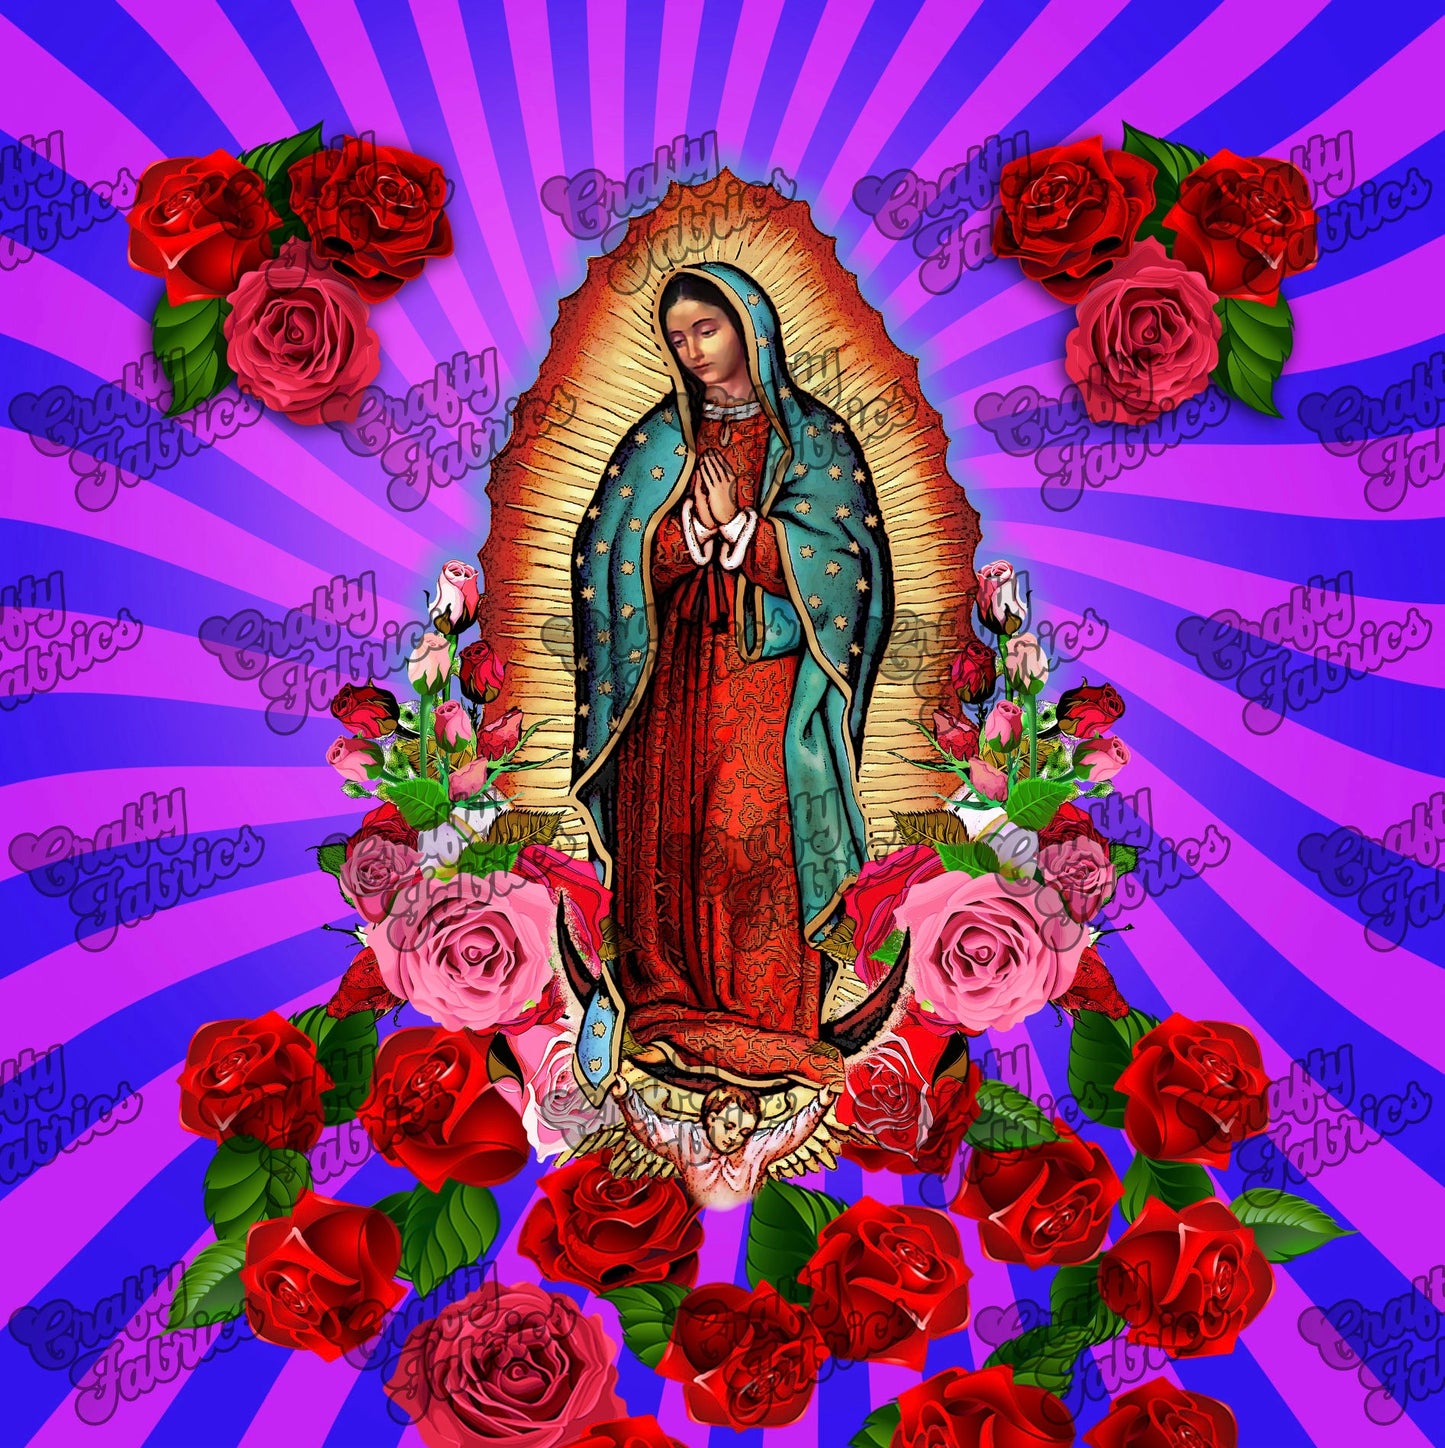 Our Lady of Guadalupe Fabric square, Virgin Mary Purple, Brown or Black fabric panel for crafts, pillow covers, banner, bandana or clothing